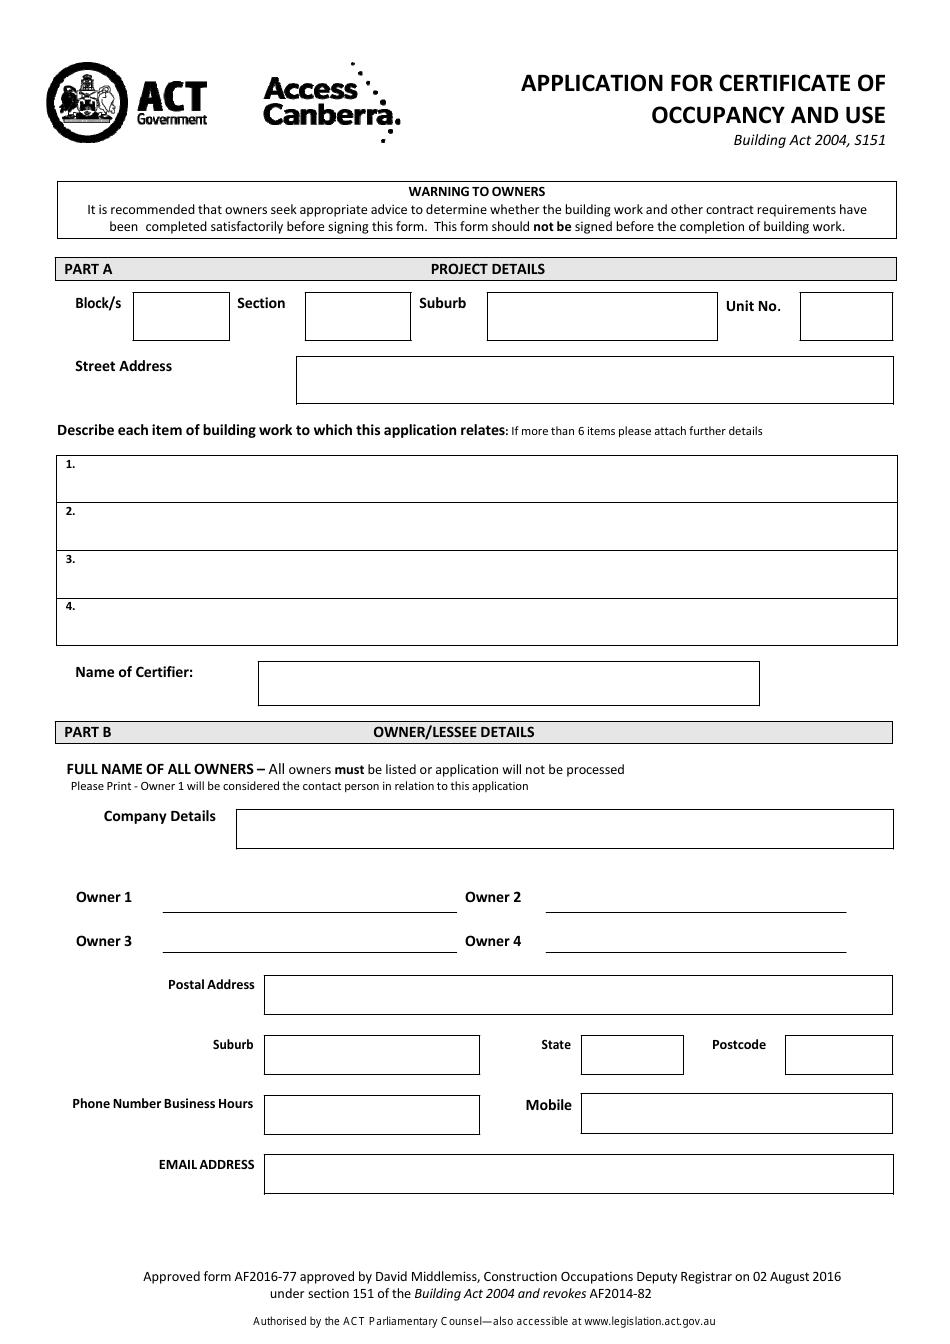 Form S151 Application for Certificate of Occupancy and Use - Australian Capital Territory, Australia, Page 1